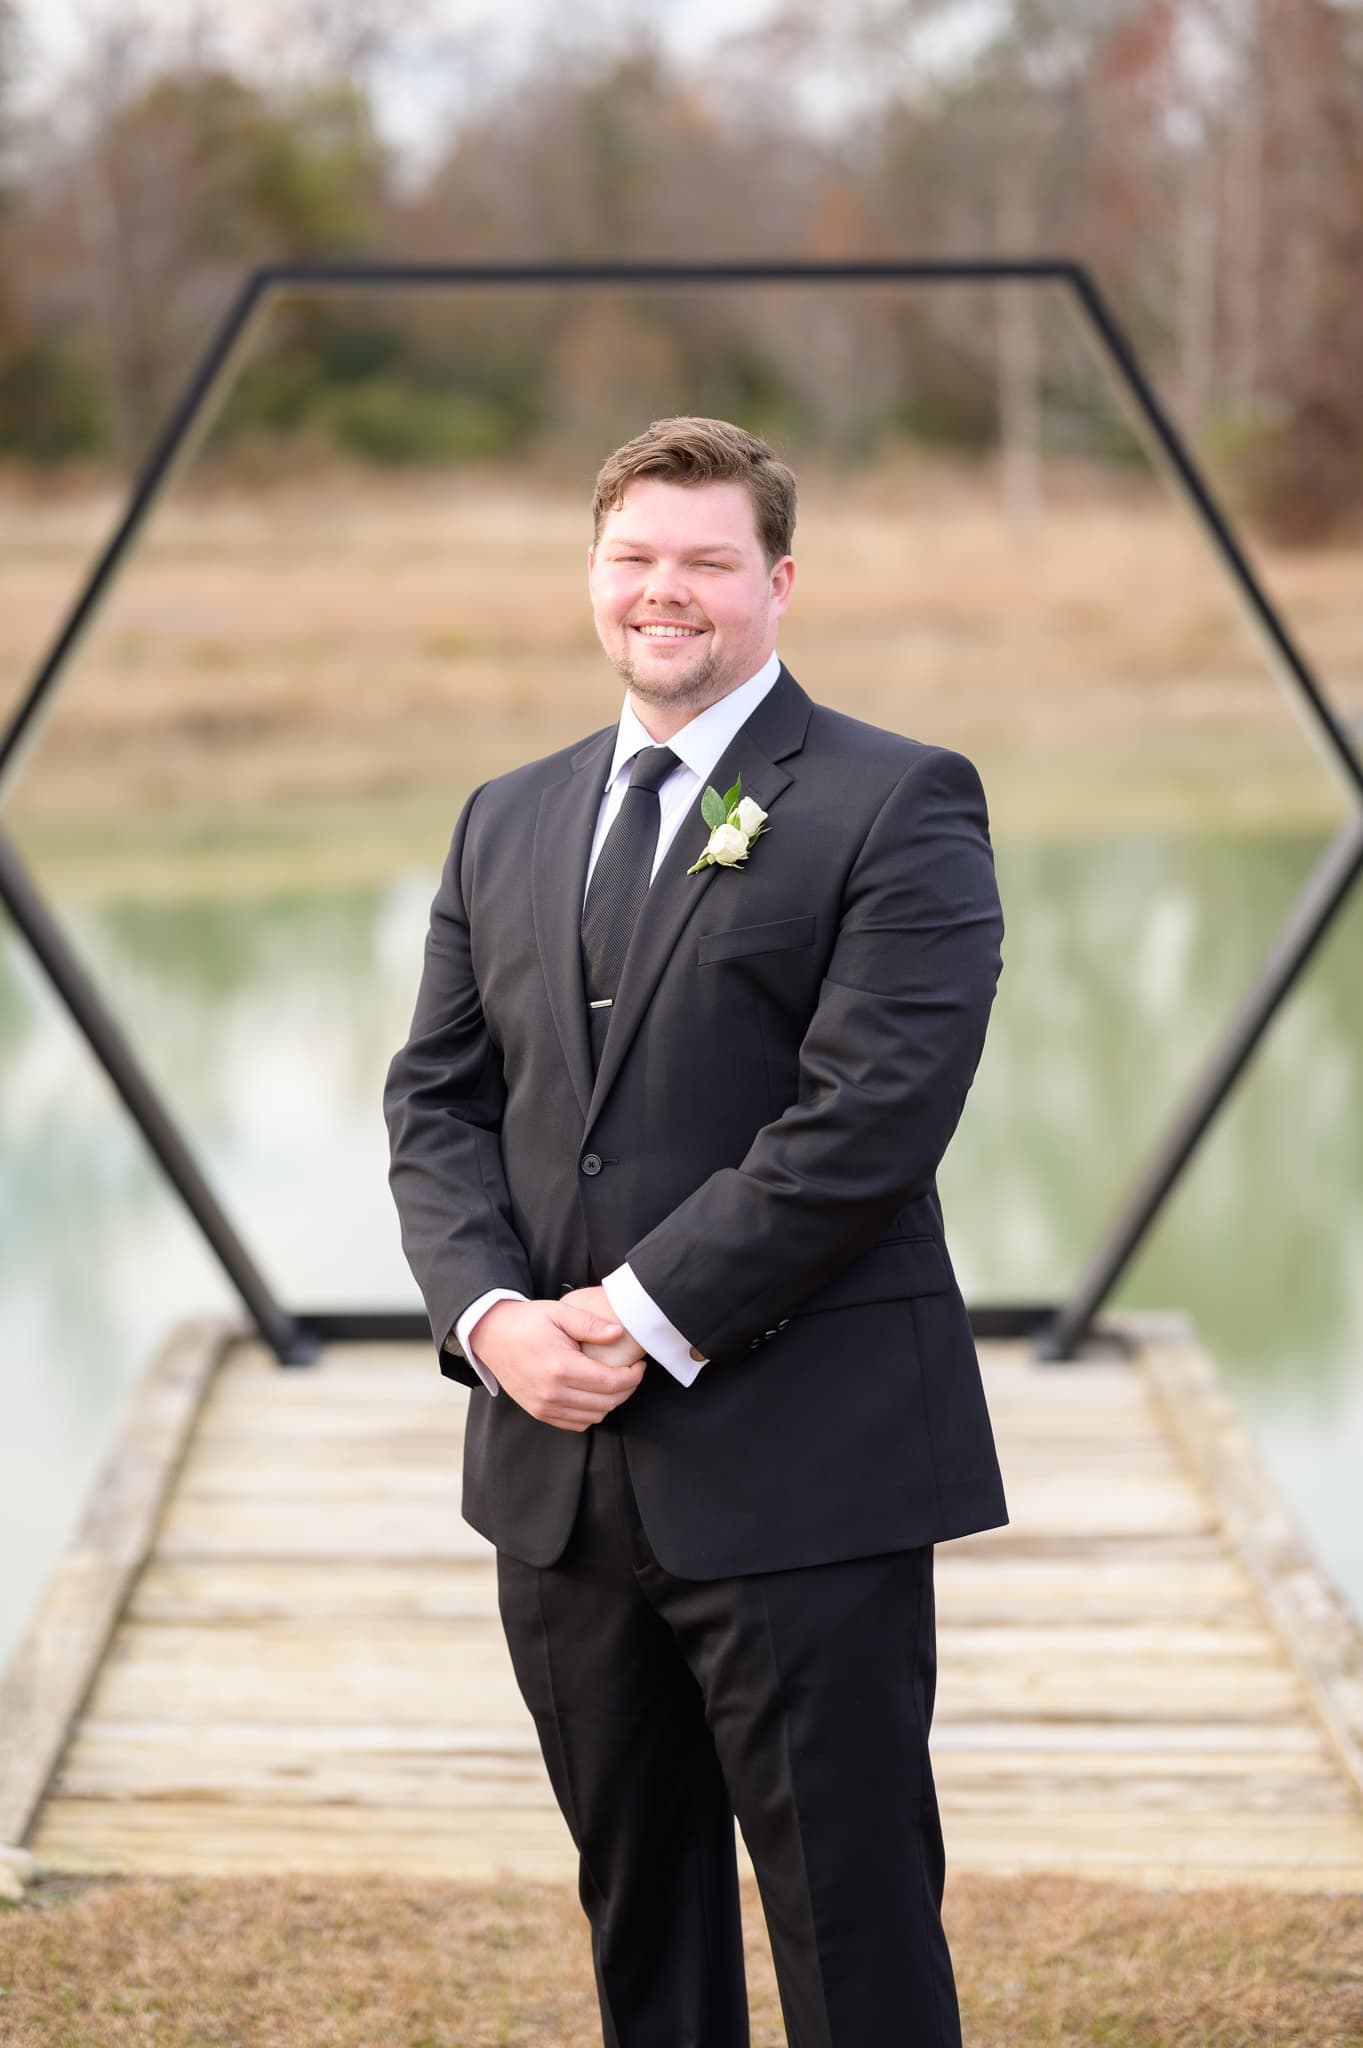 Portrait of groom by the lake - The Venue at White Oaks Farm